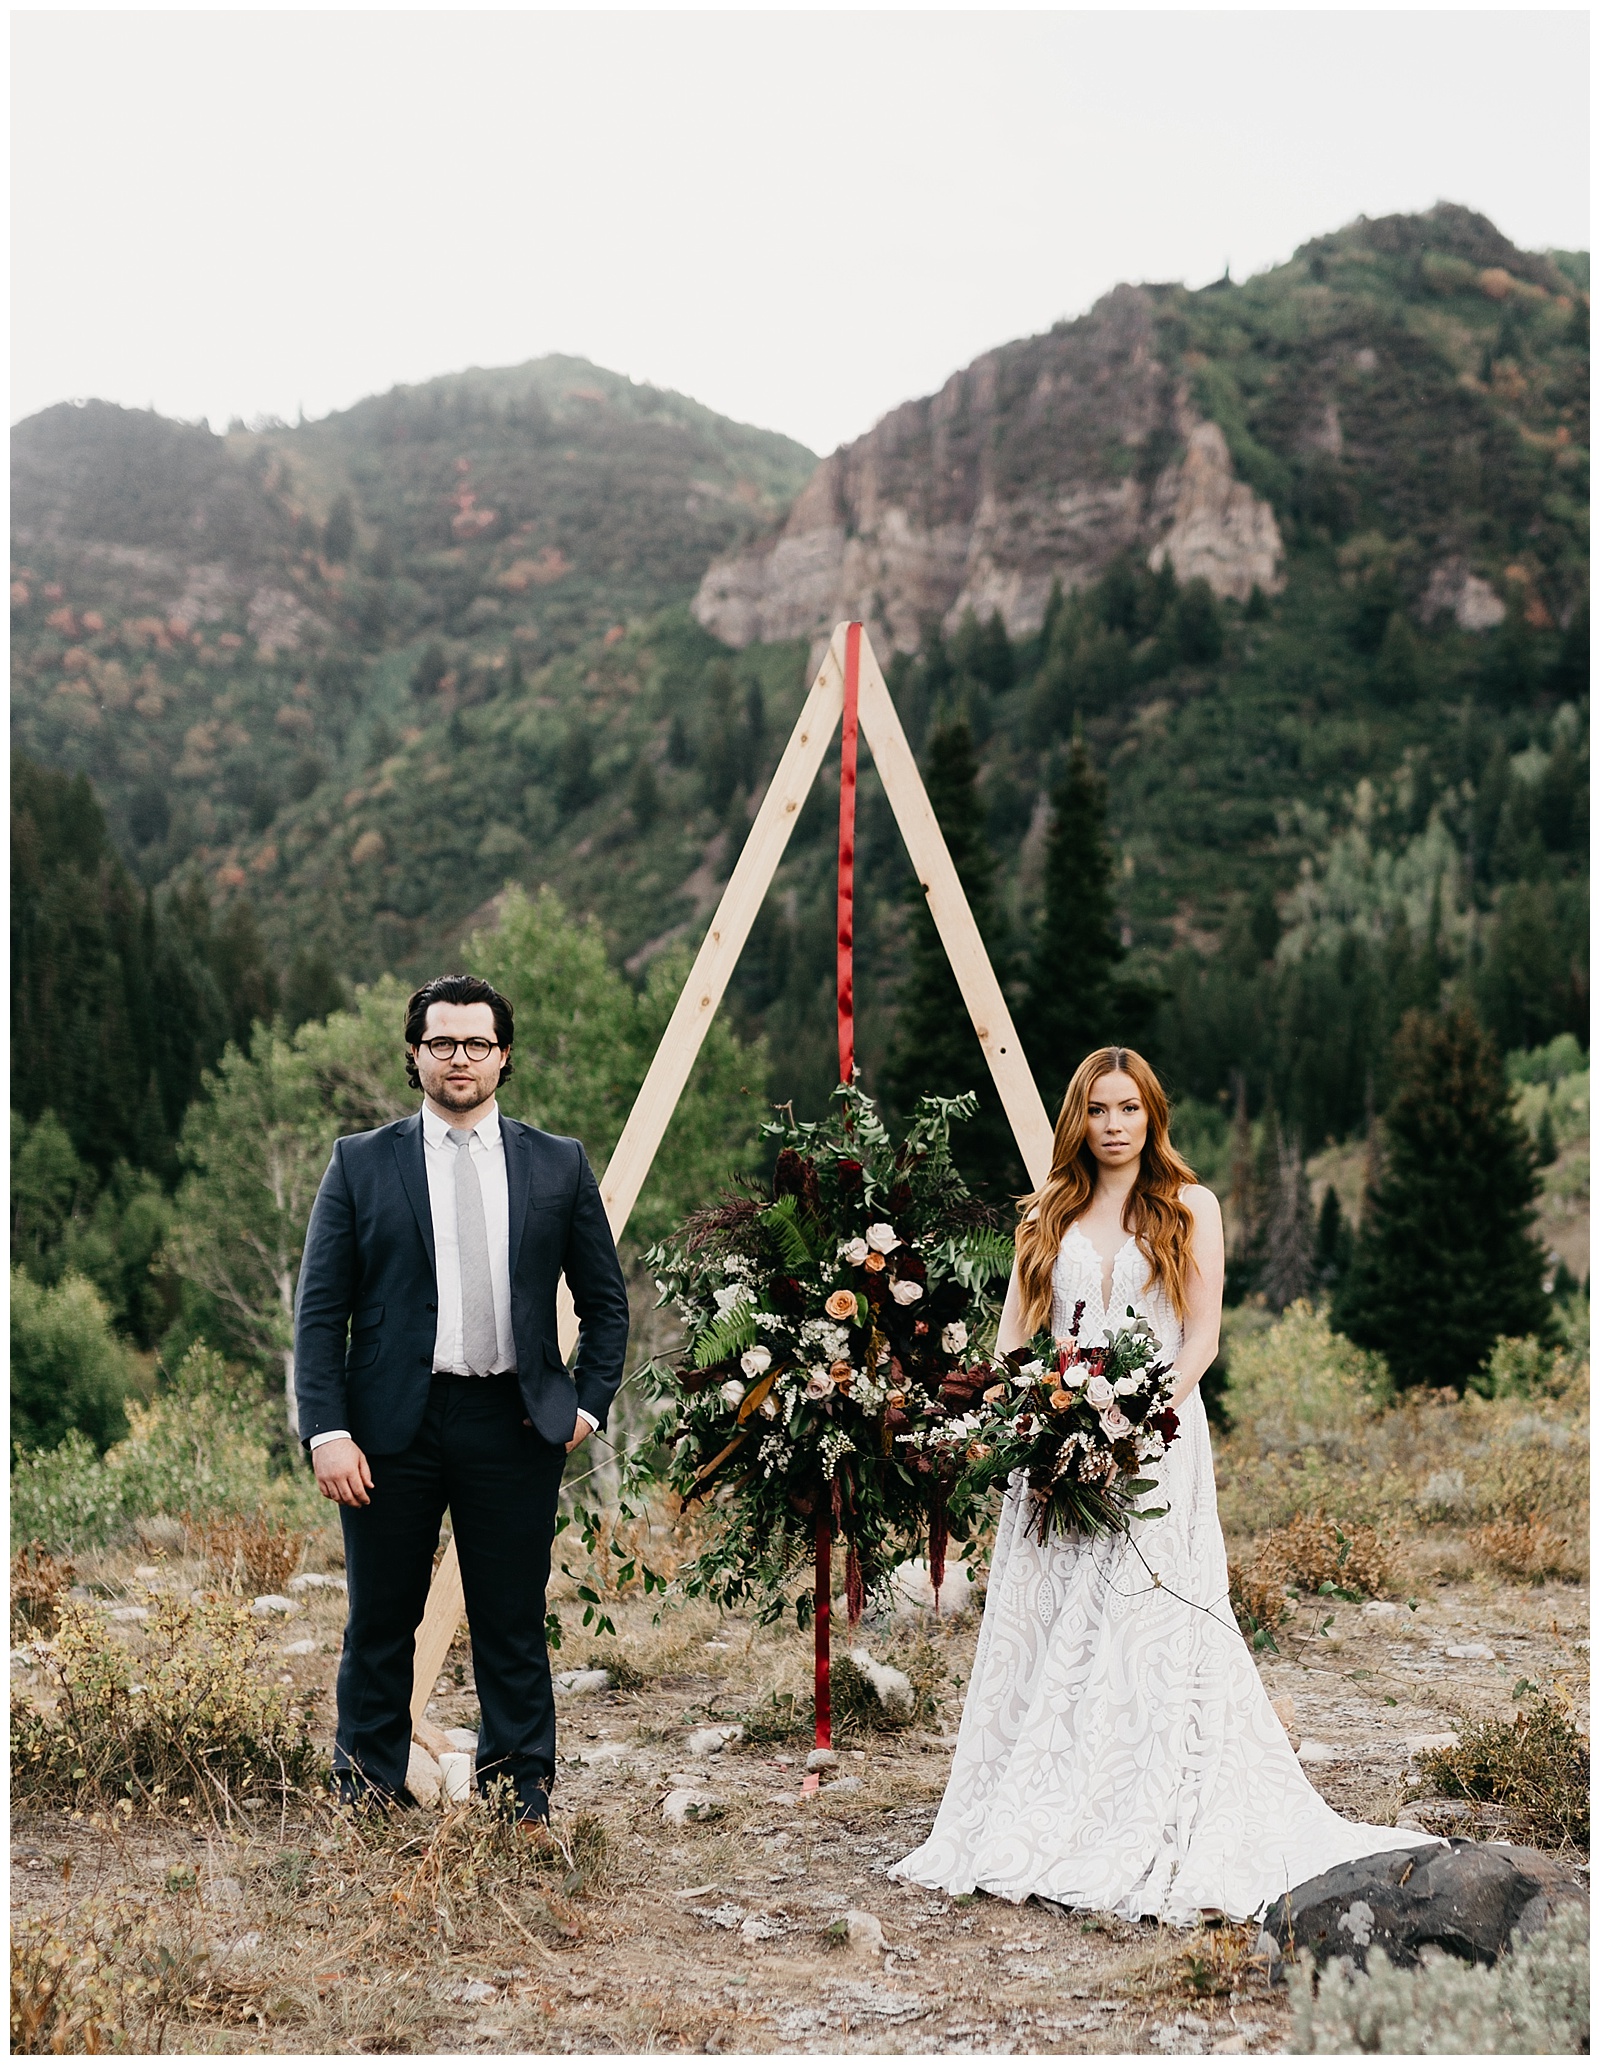 After All This Time'- Harry Potter Elopement - Nicole Aston Photo